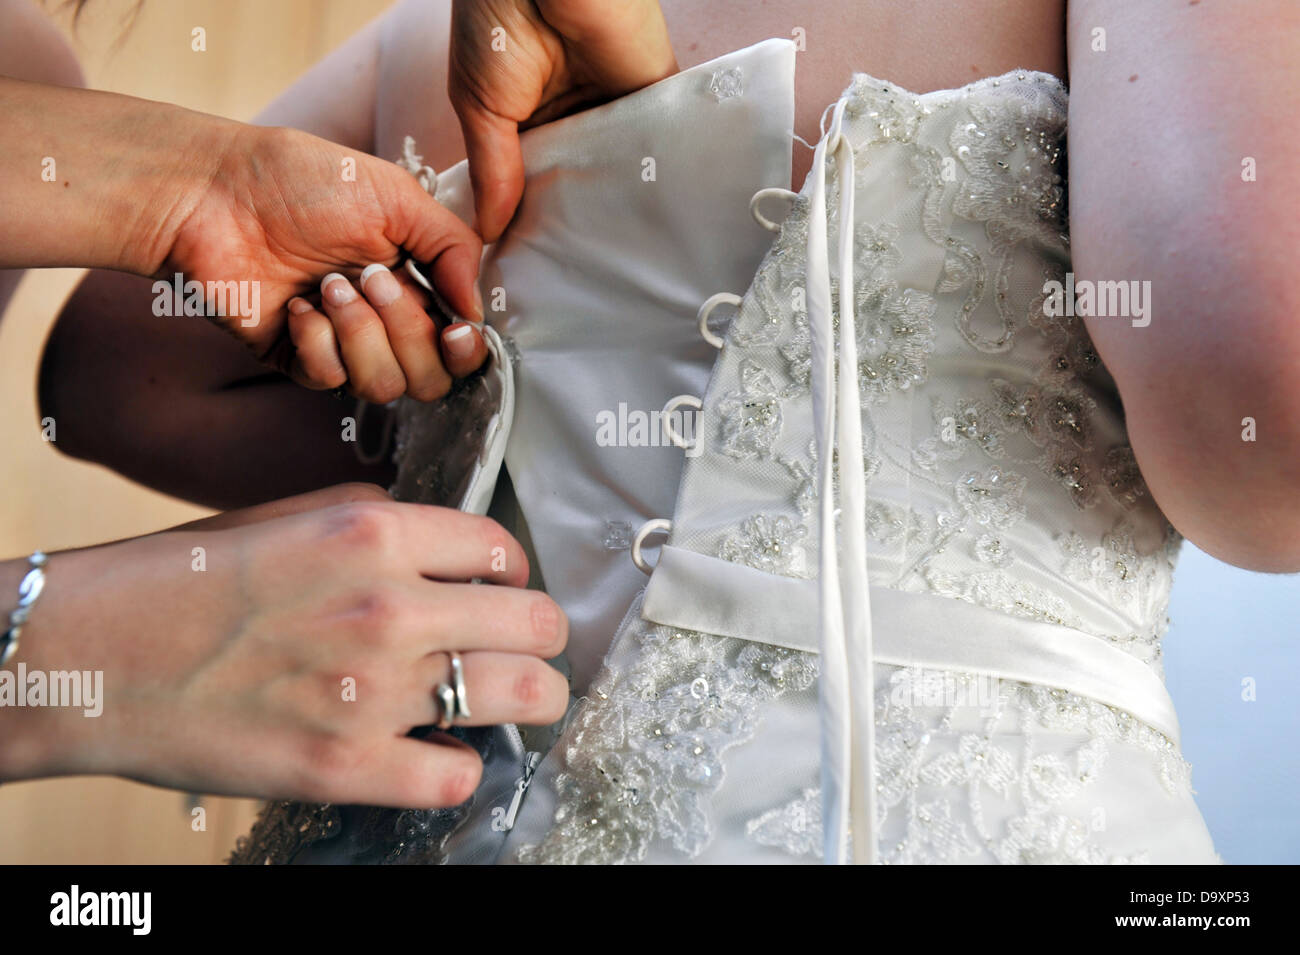 Bride is helped into her wedding dress on her wedding day. Stock Photo